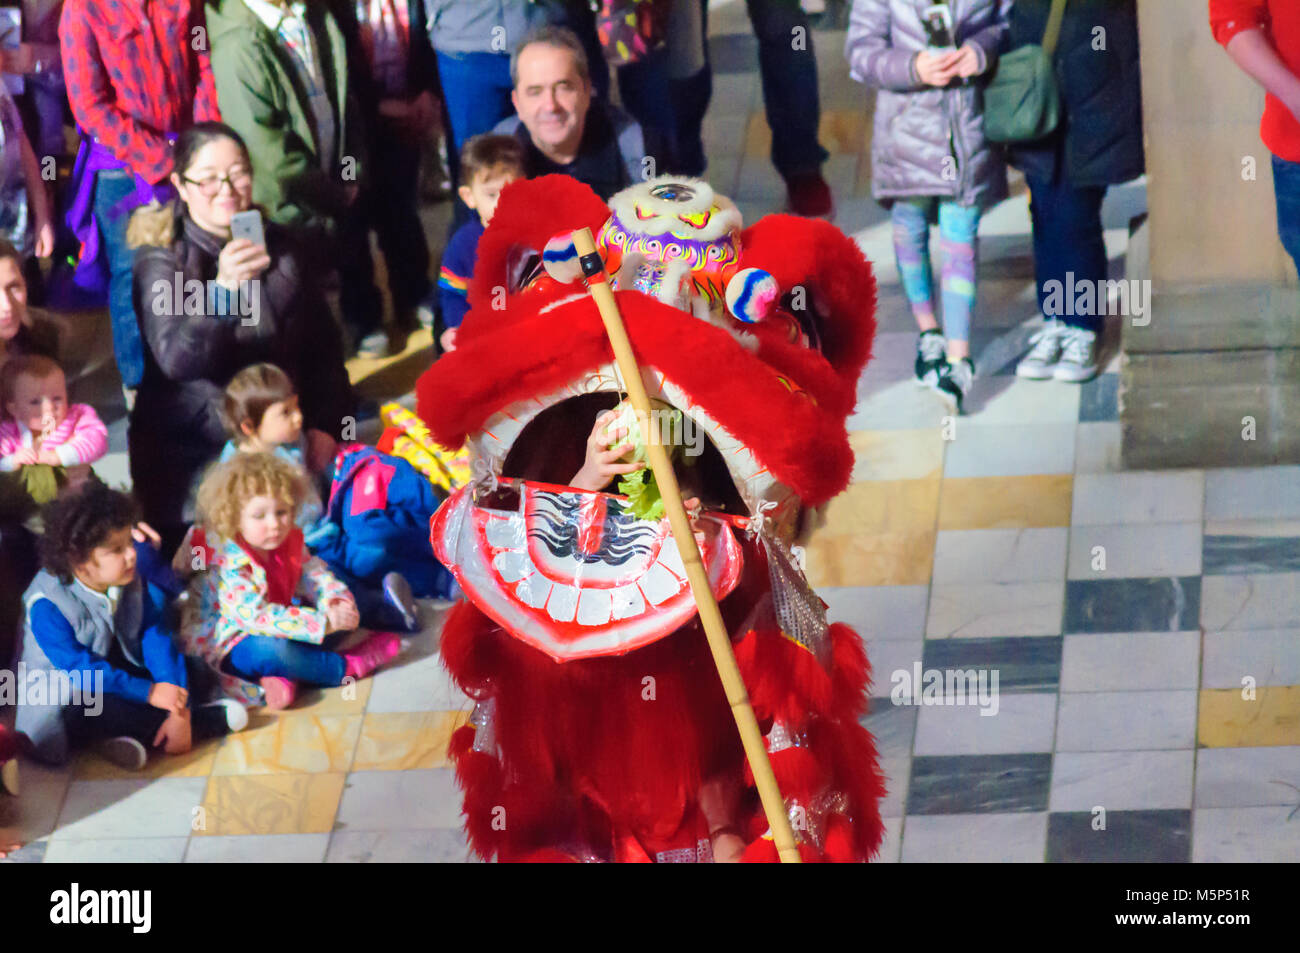 Glasgow, Scotland, UK. 25th February, 2018. Ricefield Arts and Cultural Centre  celebrate the Chinese New Year of the dog with a performance in The Kelvingrove Art Gallery and Museum. Credit: Skully/Alamy Live News Stock Photo